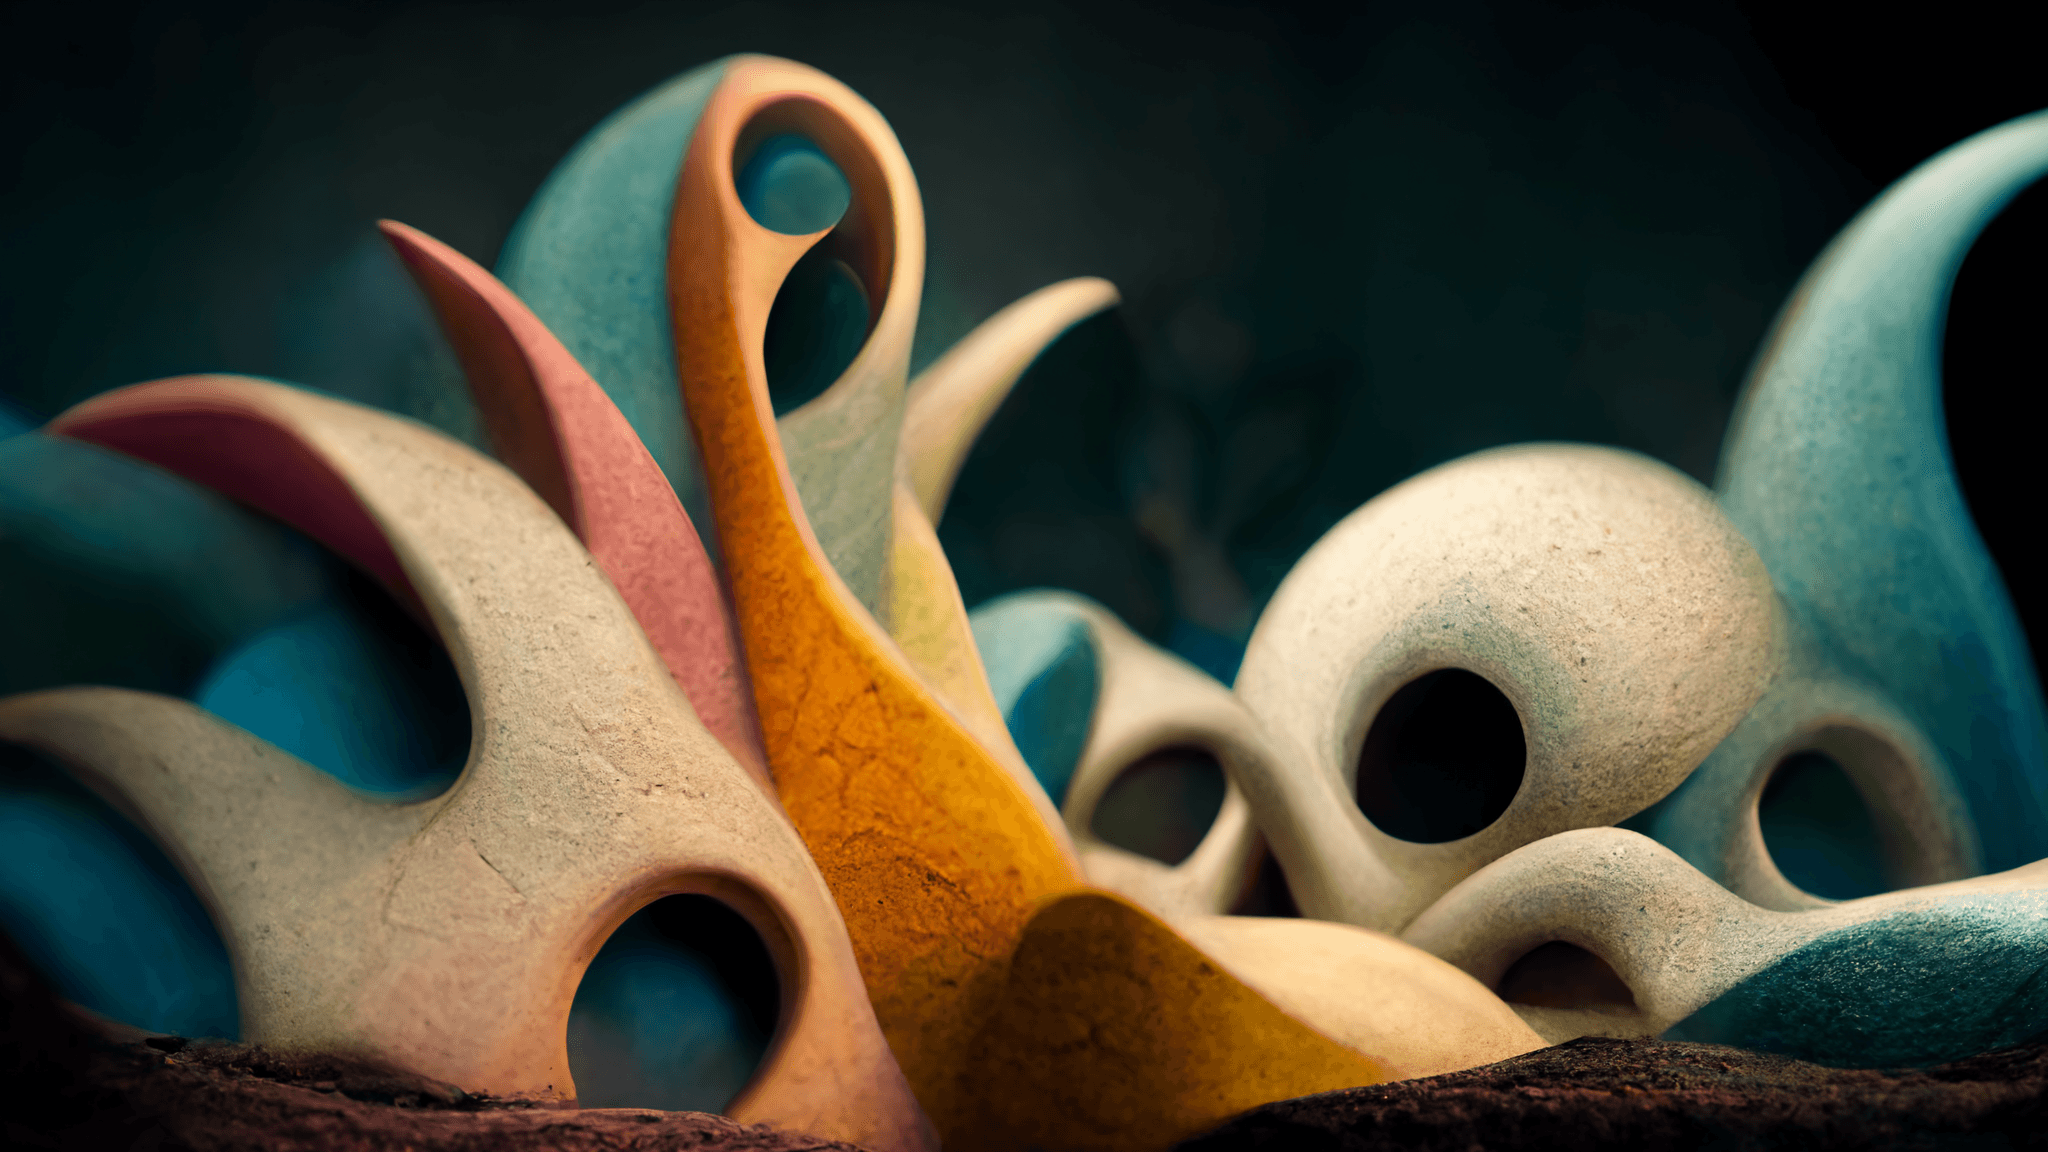 Abstract Clay Sculpture in Motion #1